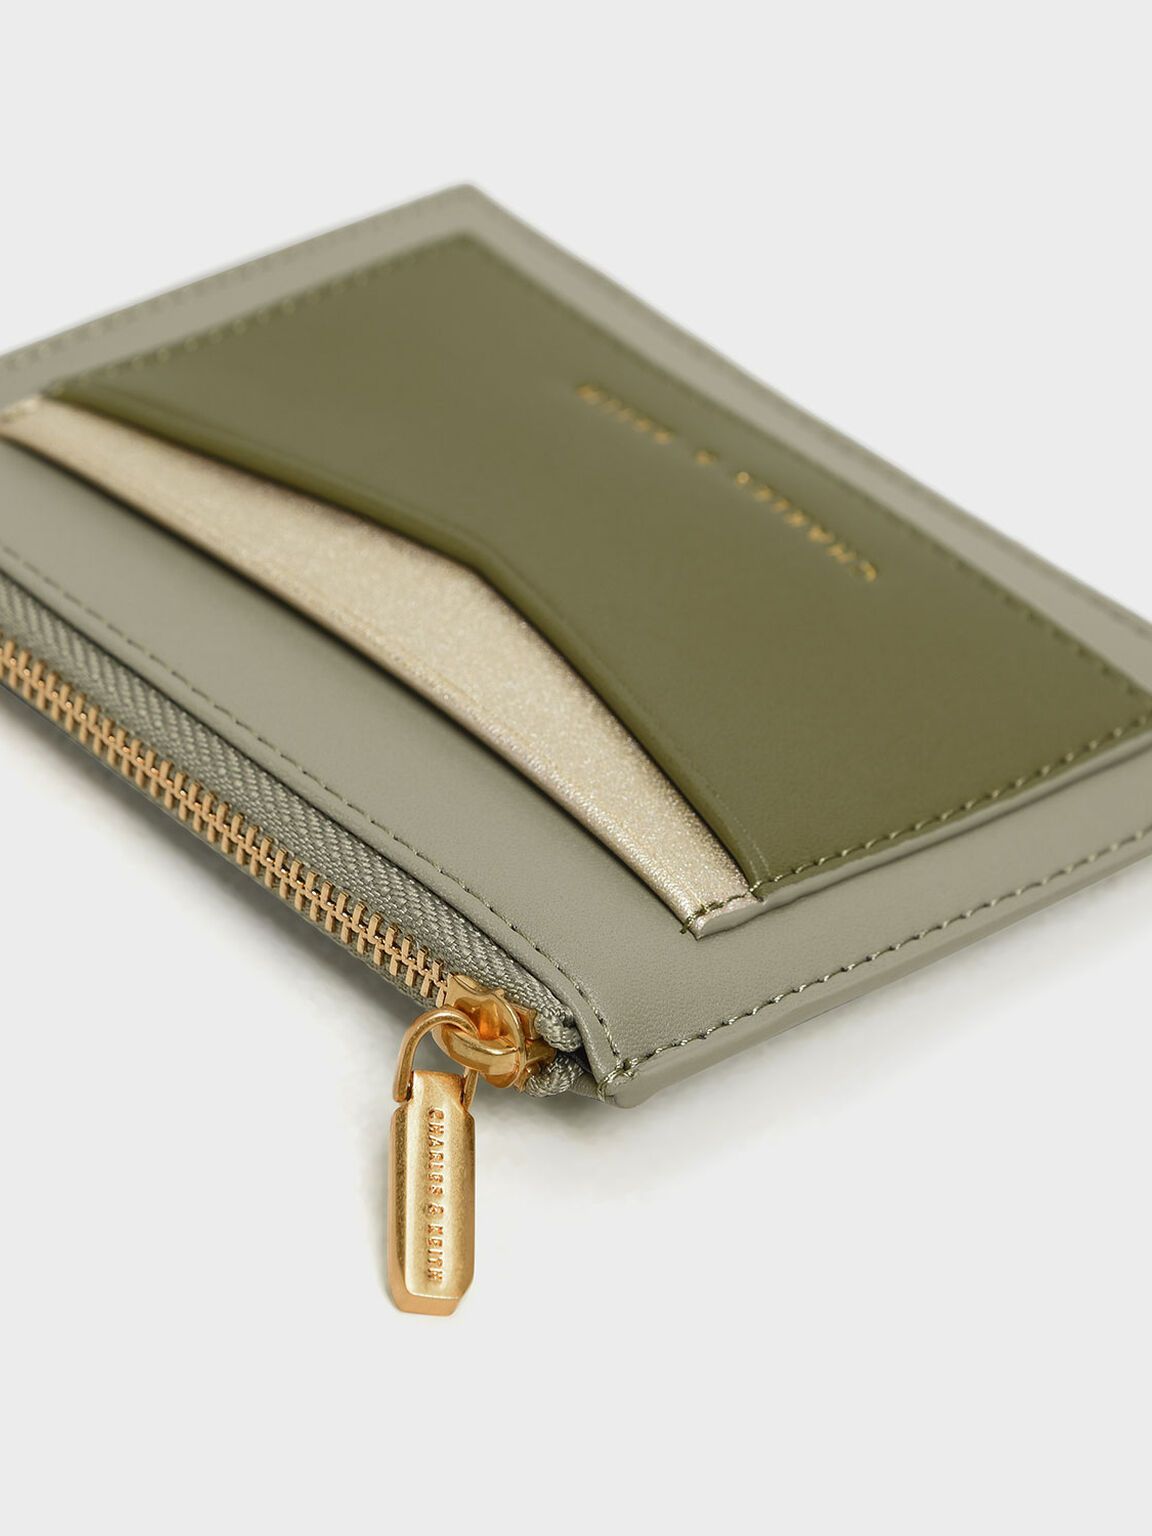 Wallets For Women: Chic and Functional Accessories for Every Day